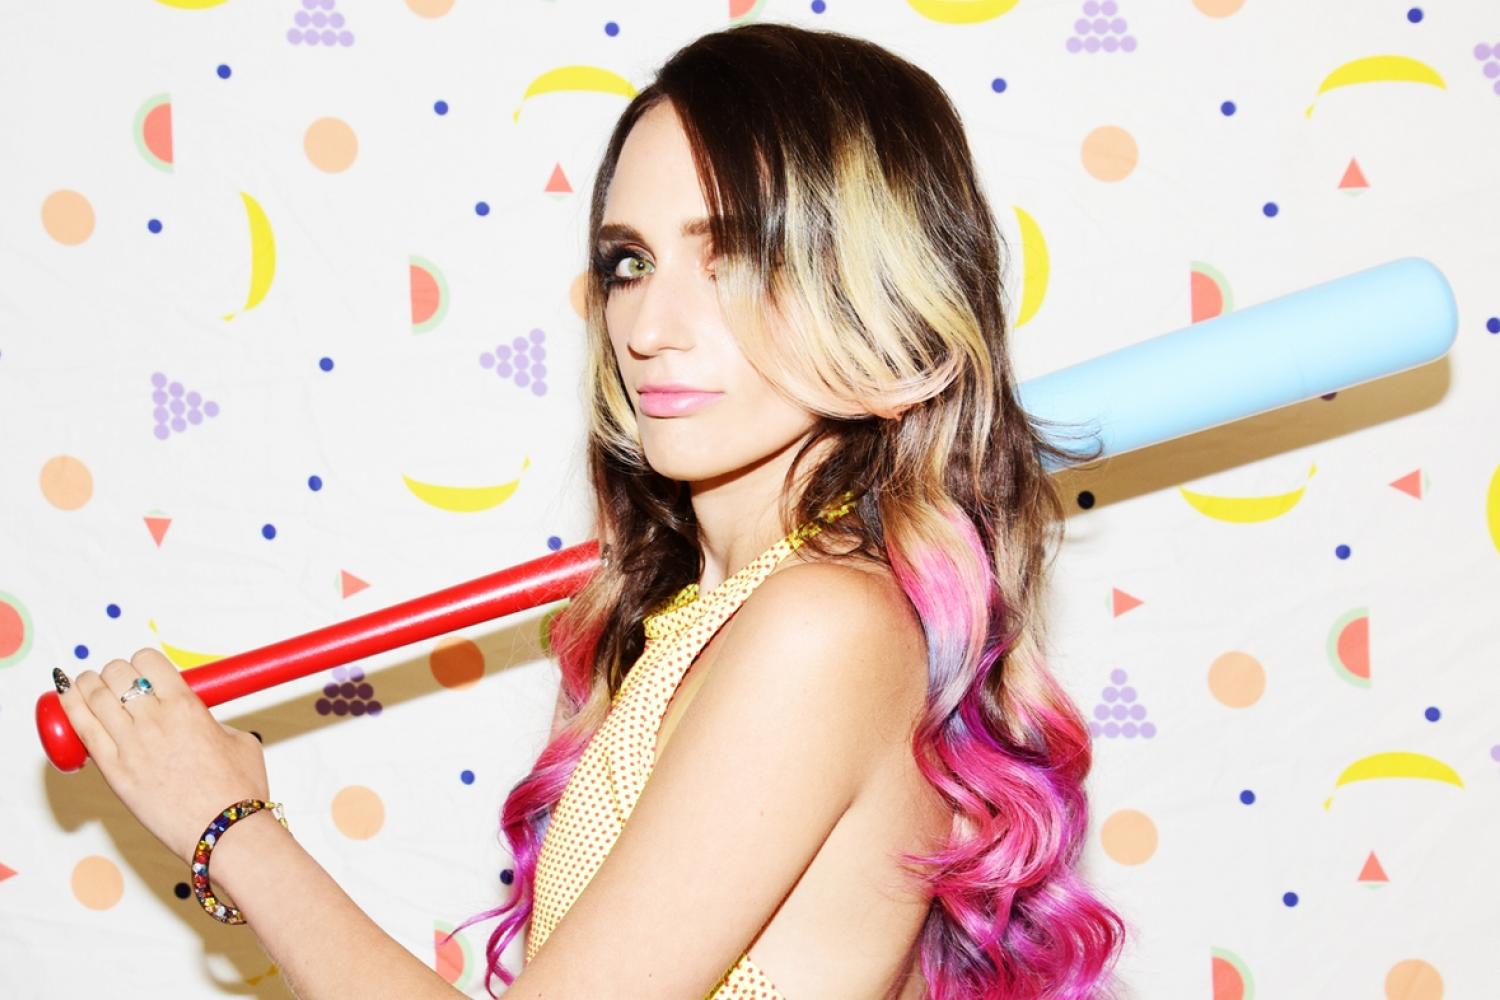 Ava Muir interviews Sadie Dupuis (Speedy Ortiz) on her new solo project Sad13, 'Slugger' out now on Carpark Records